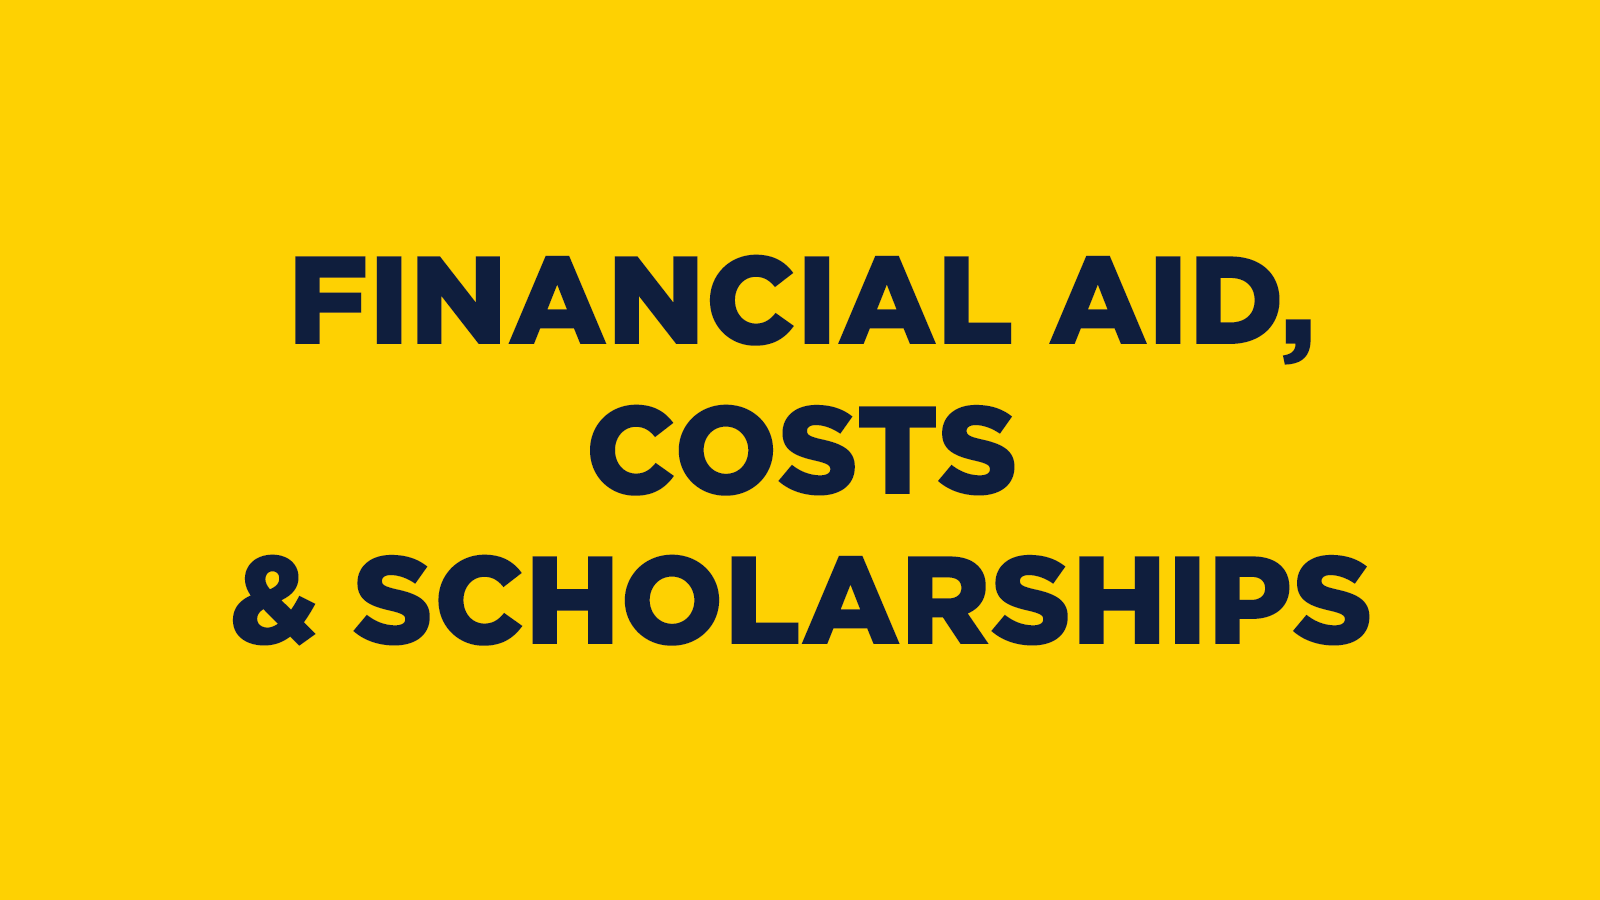 Financial Aid, Costs & Scholarships